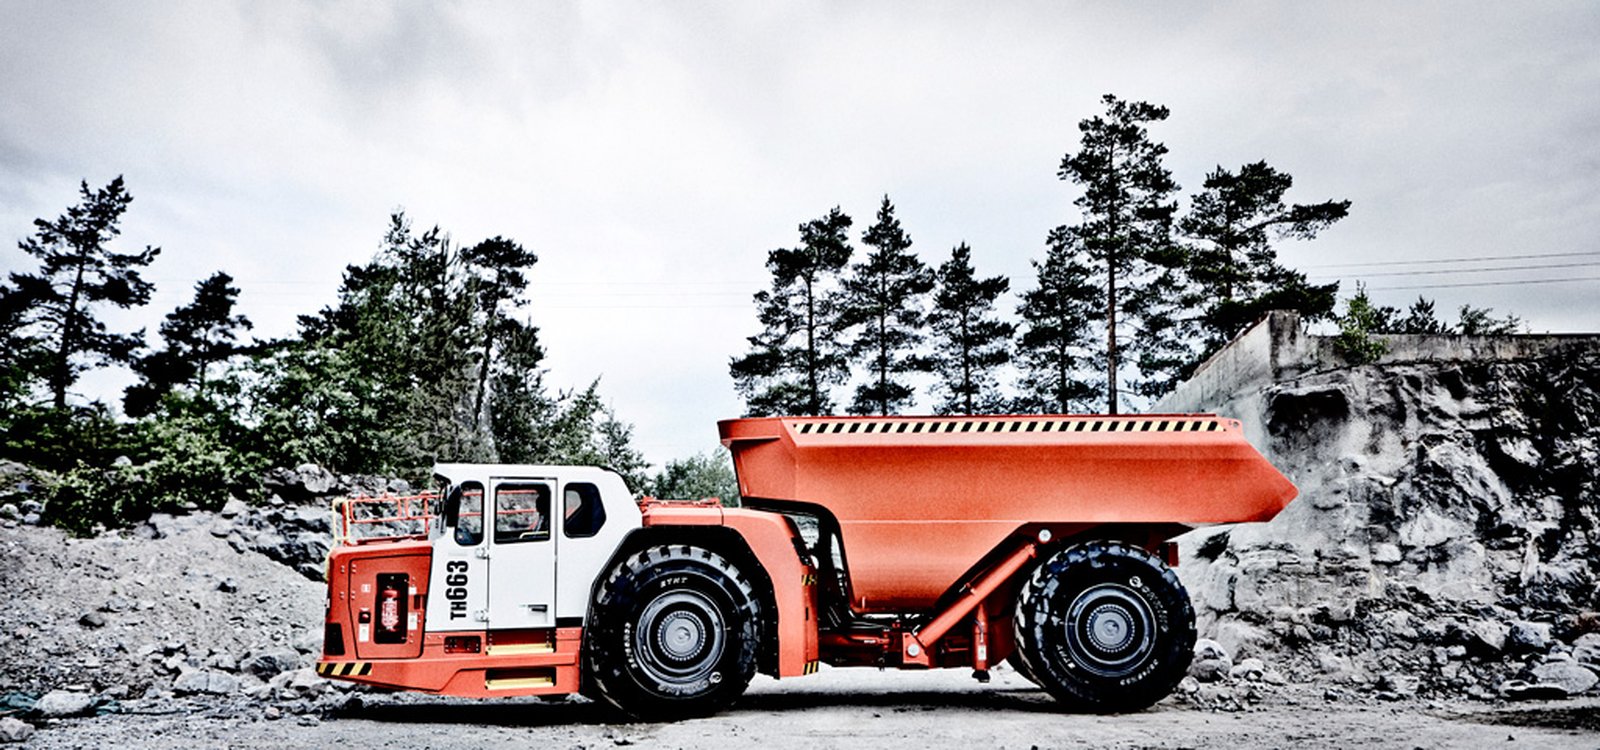 The customer consultation process has helped Sandvik make its TH663 the truck it is today.